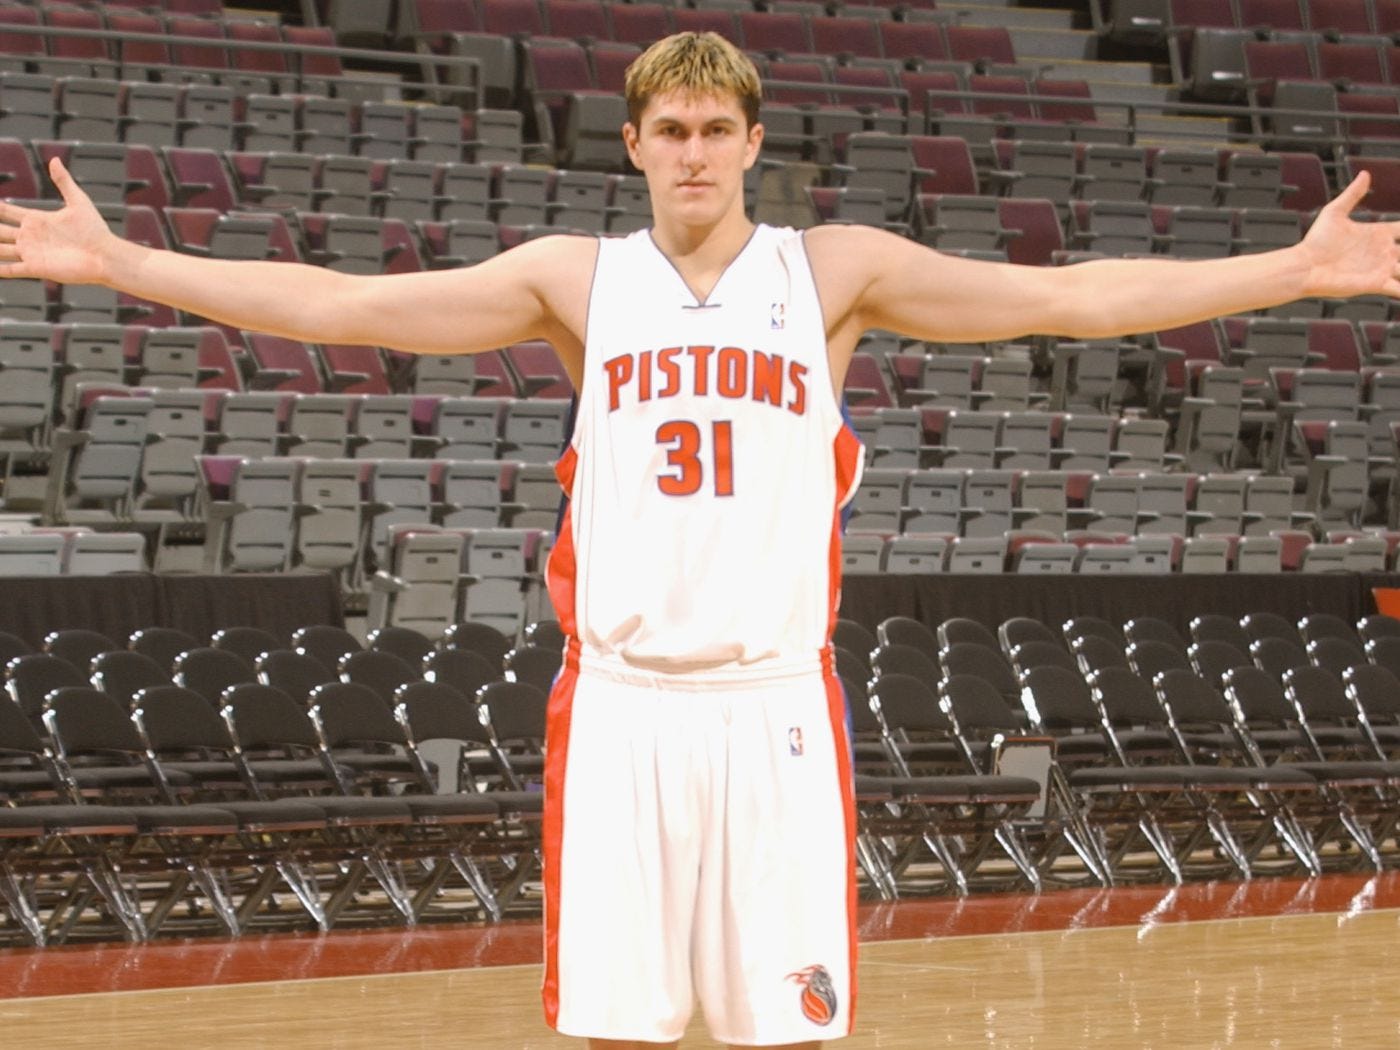 Remembering the insane hyperbole about Darko Milicic before he was drafted  - Detroit Bad Boys